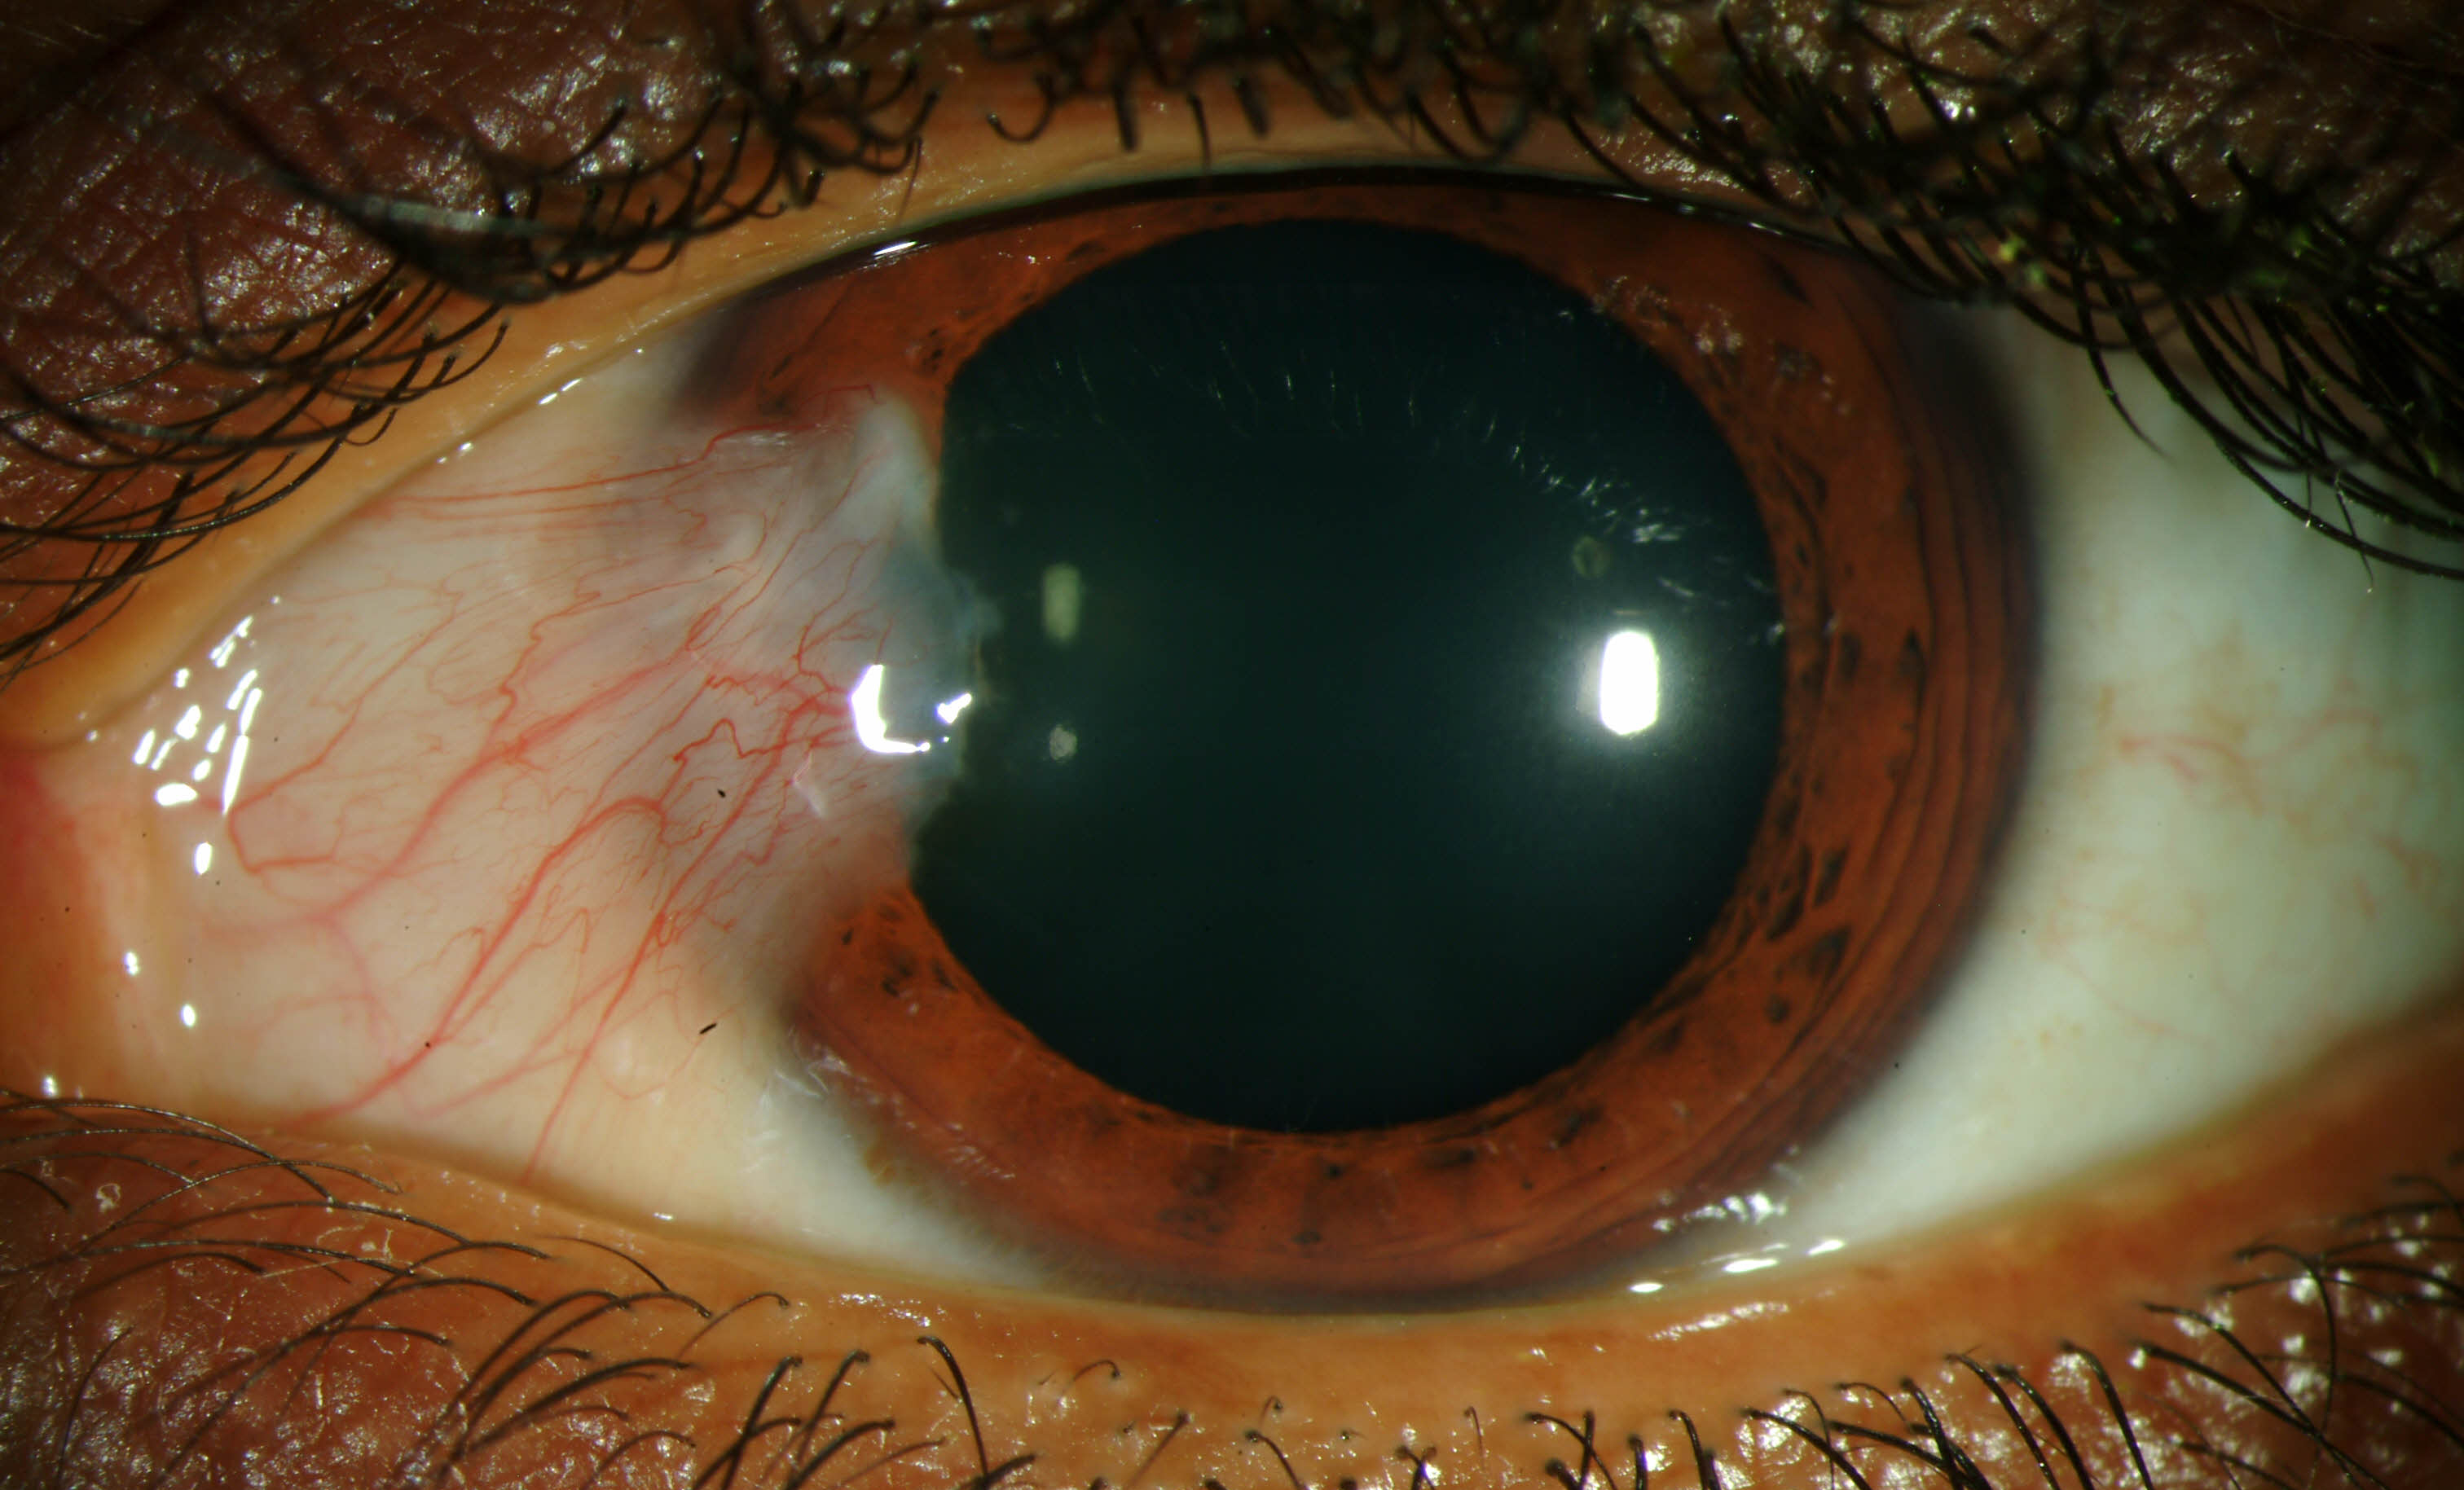 Pterygium length, width and area were found to predict optical changes, while thickness may serve as a clinical indicator of eventual recurrence.